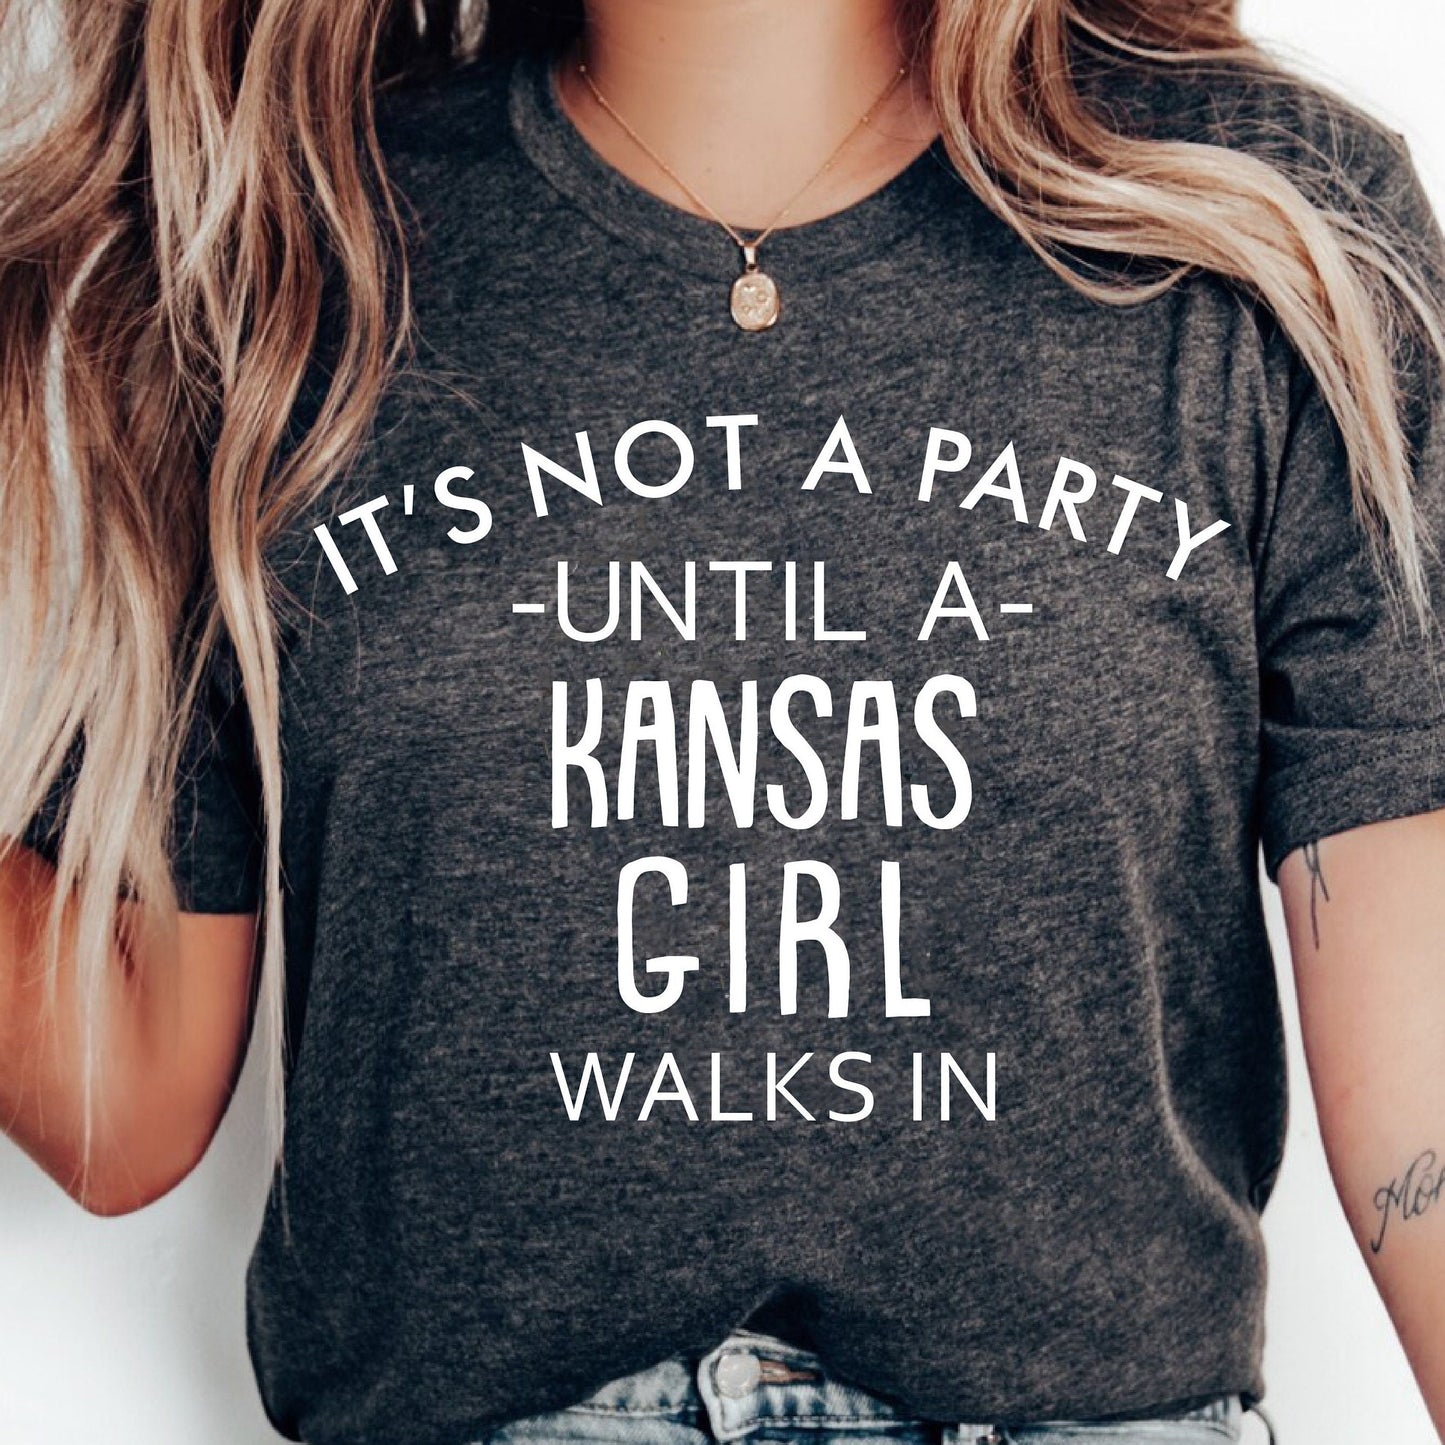 It's Not A Party Until A Kansas Girl Walks In T-shirt